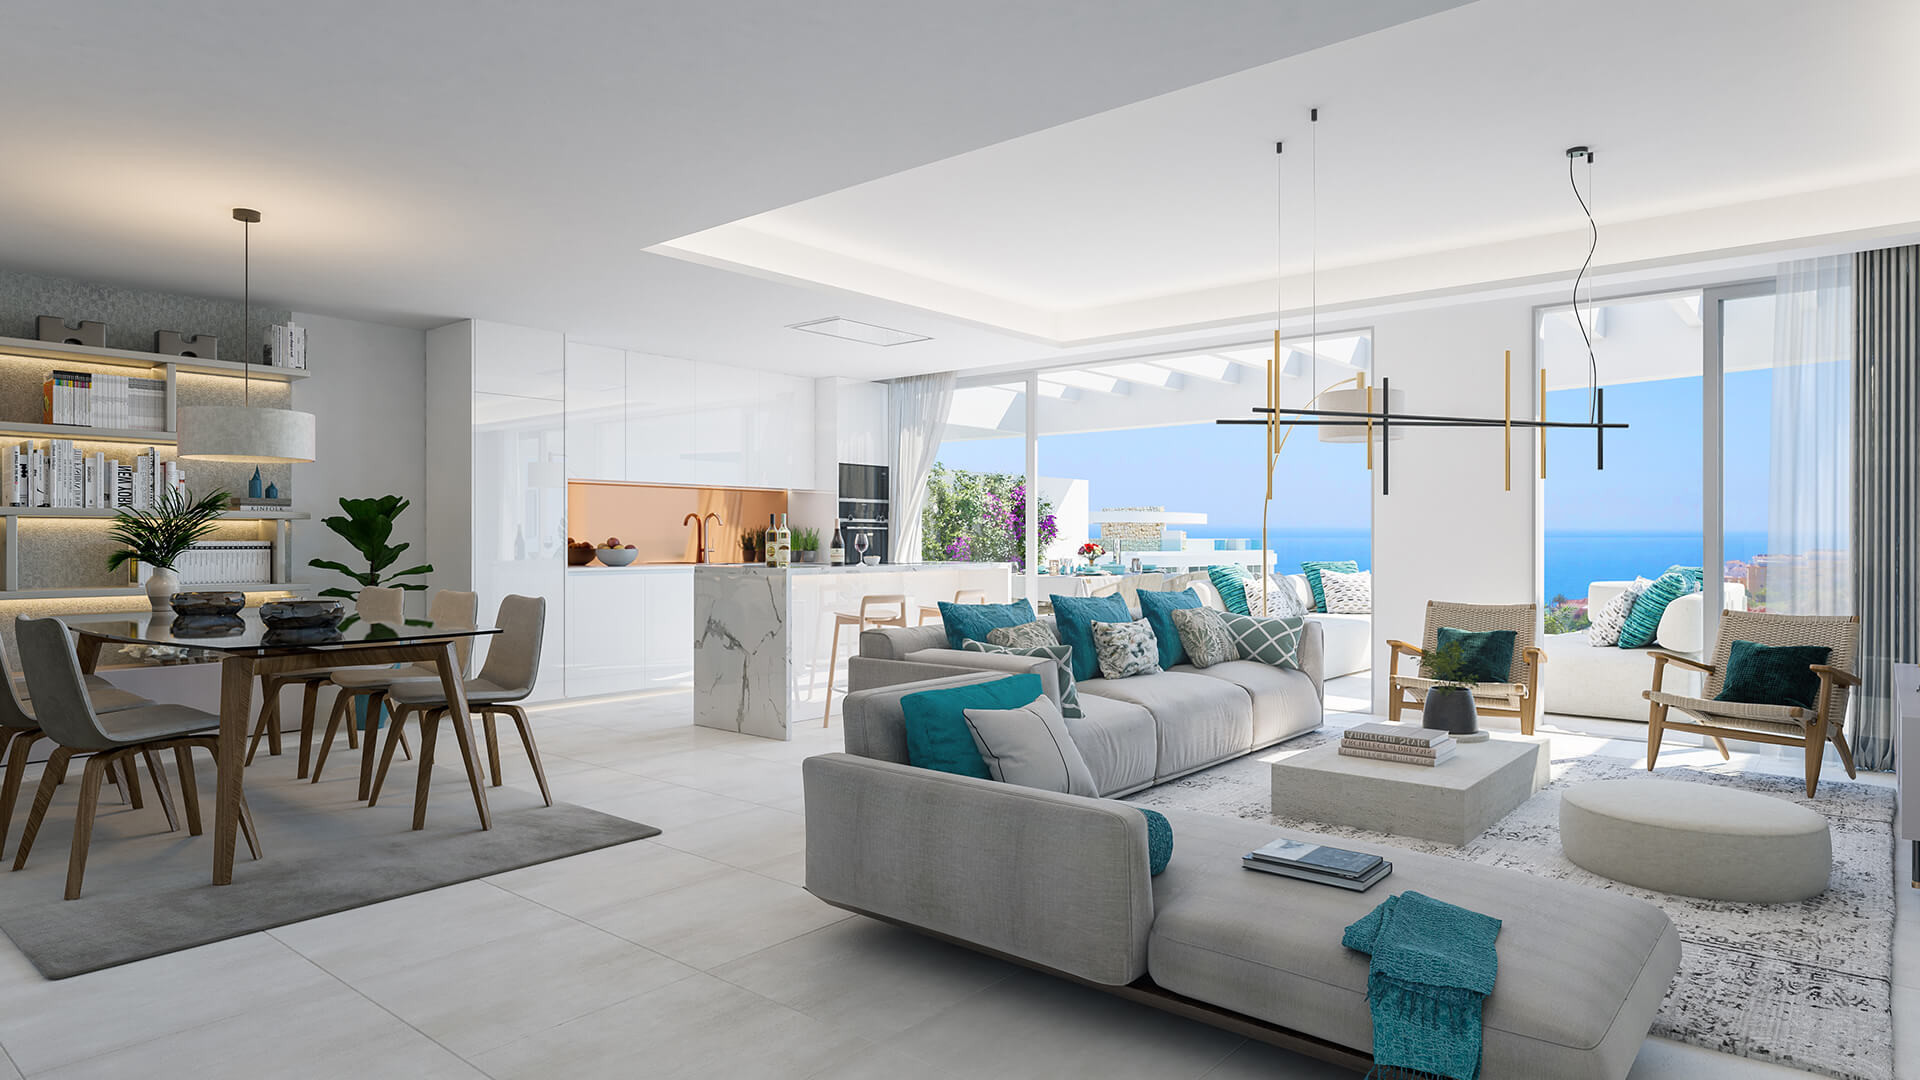 Brand new two bedroom flat with sea views in Mijas Costa. | Image 2